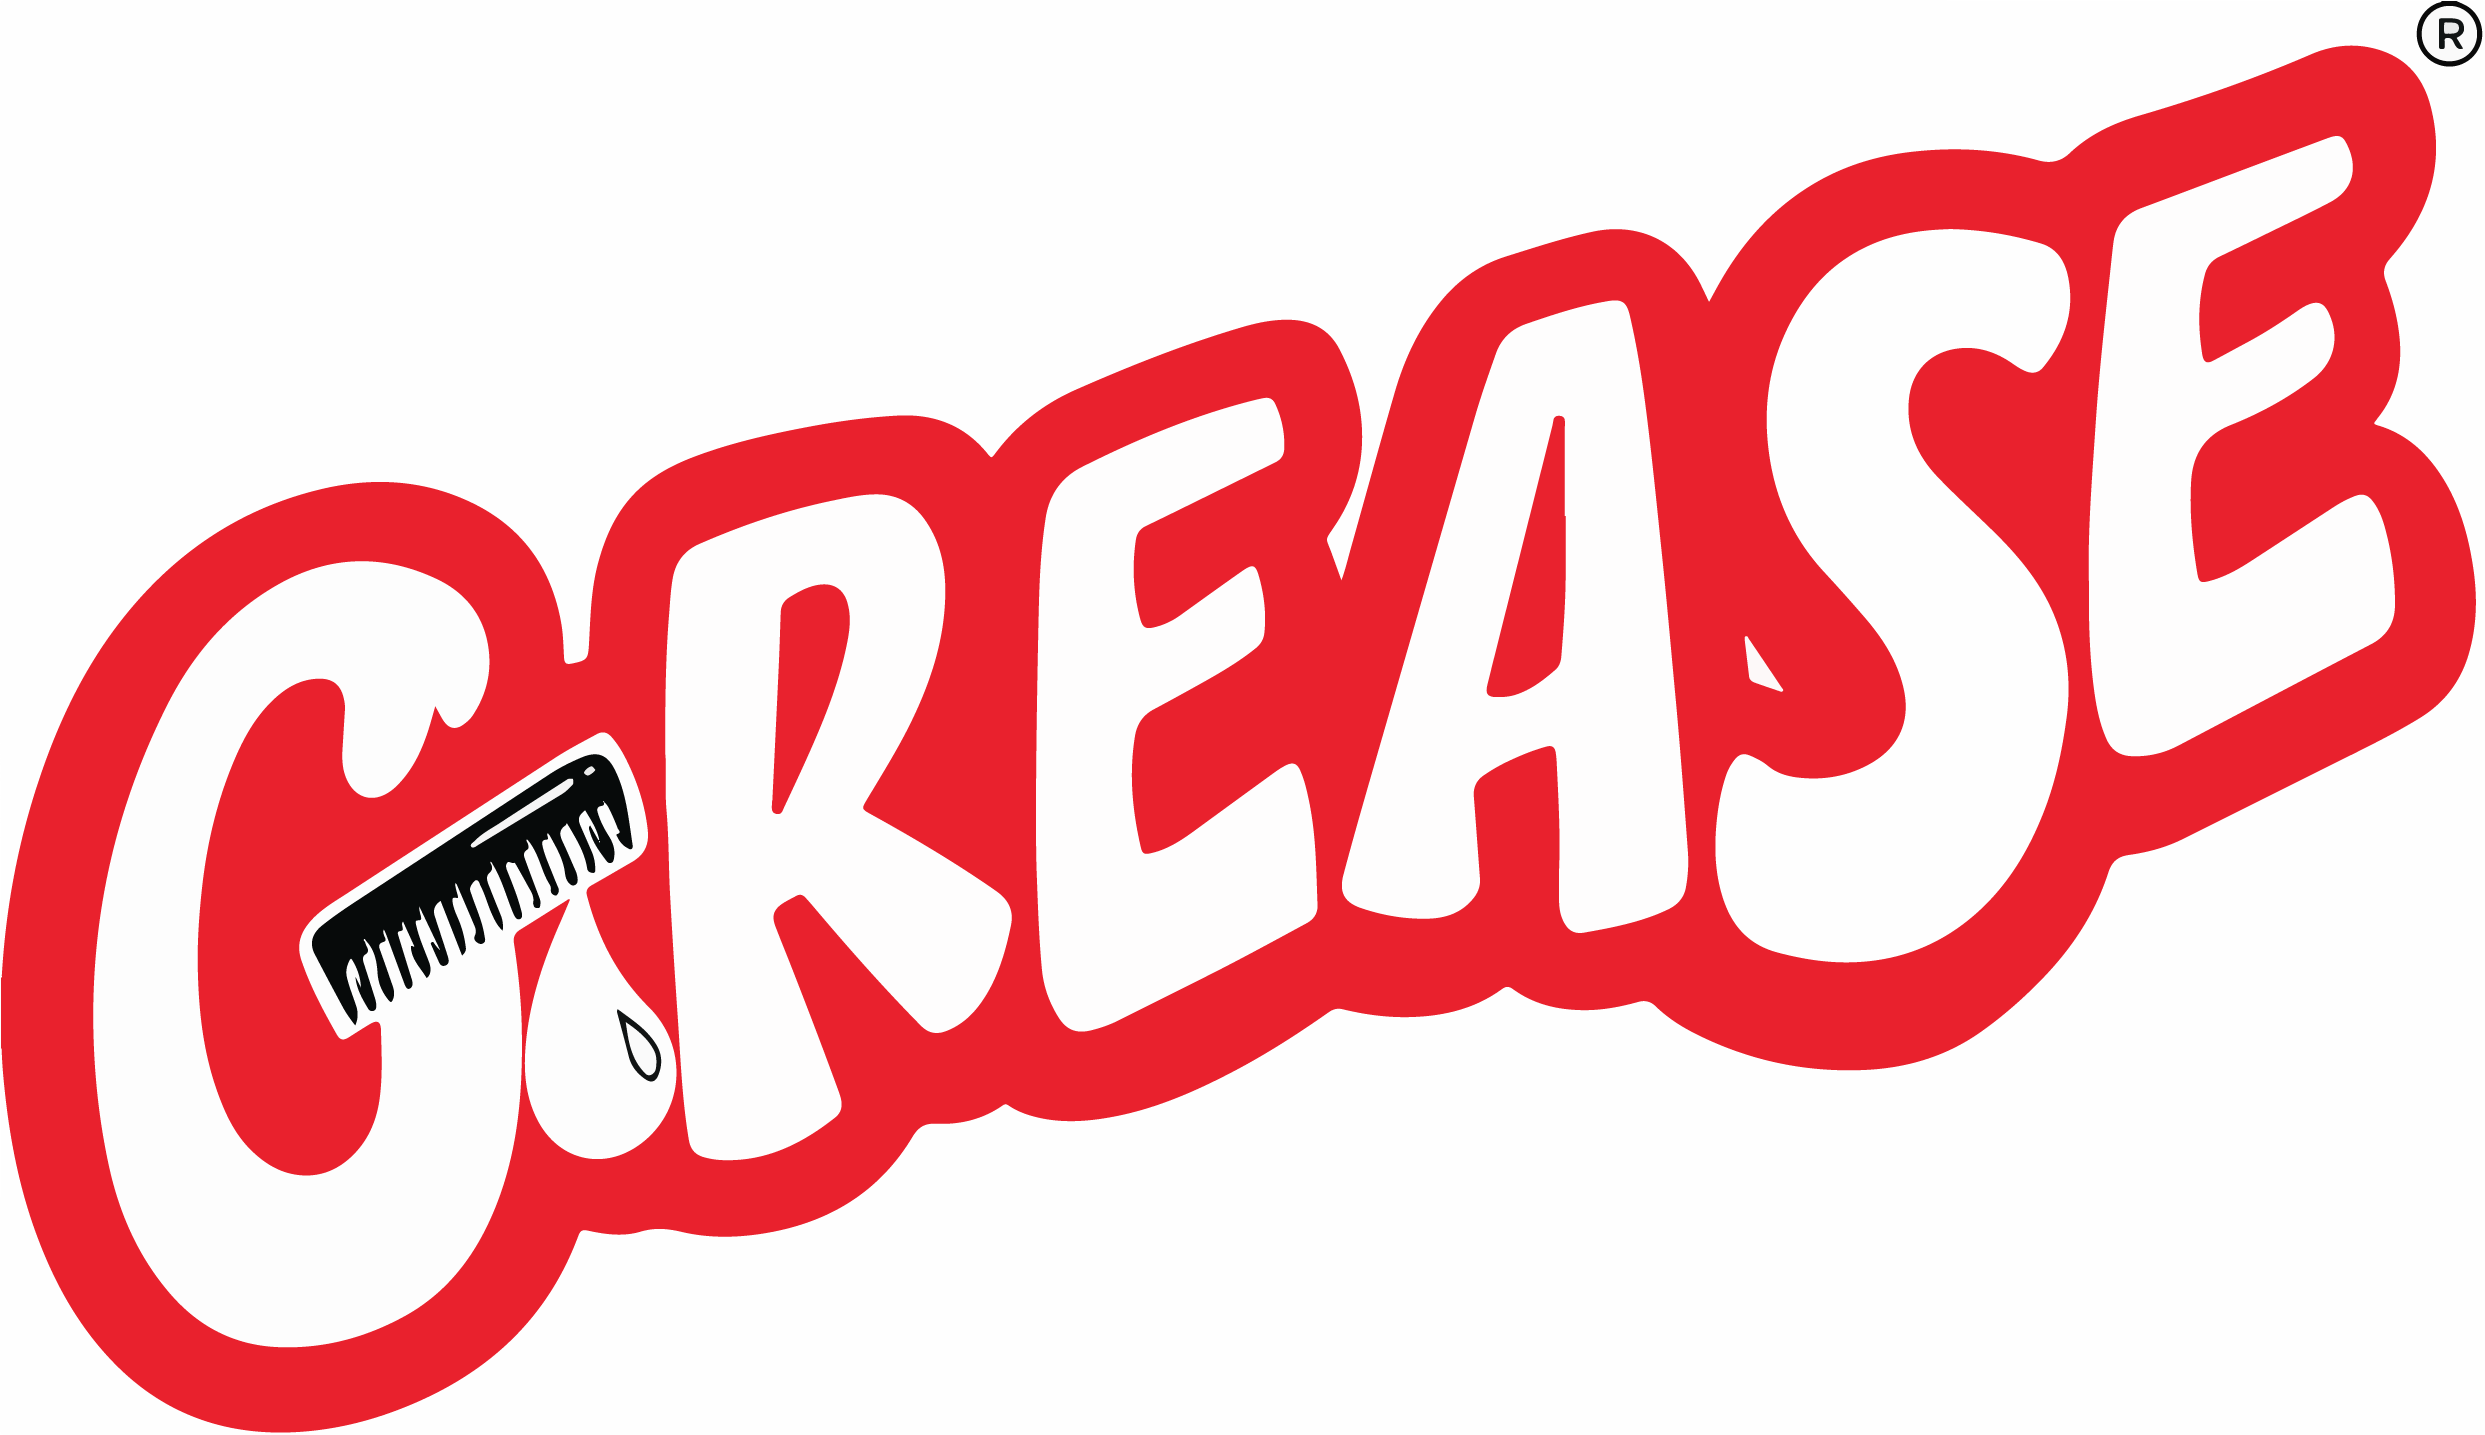 Grease_logo_ISOLATED_RED_BLACKCOMB